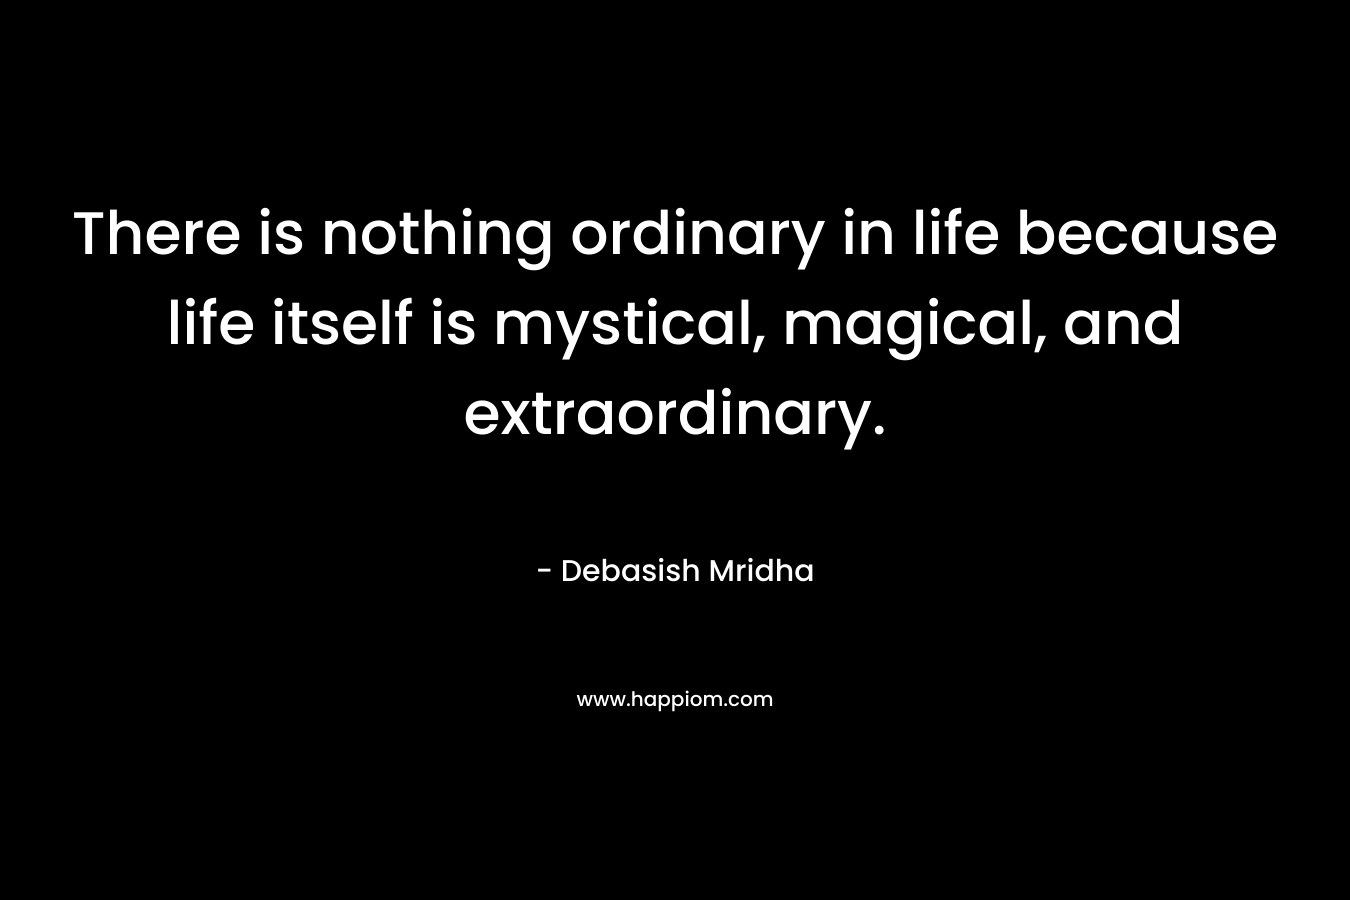 There is nothing ordinary in life because life itself is mystical, magical, and extraordinary.